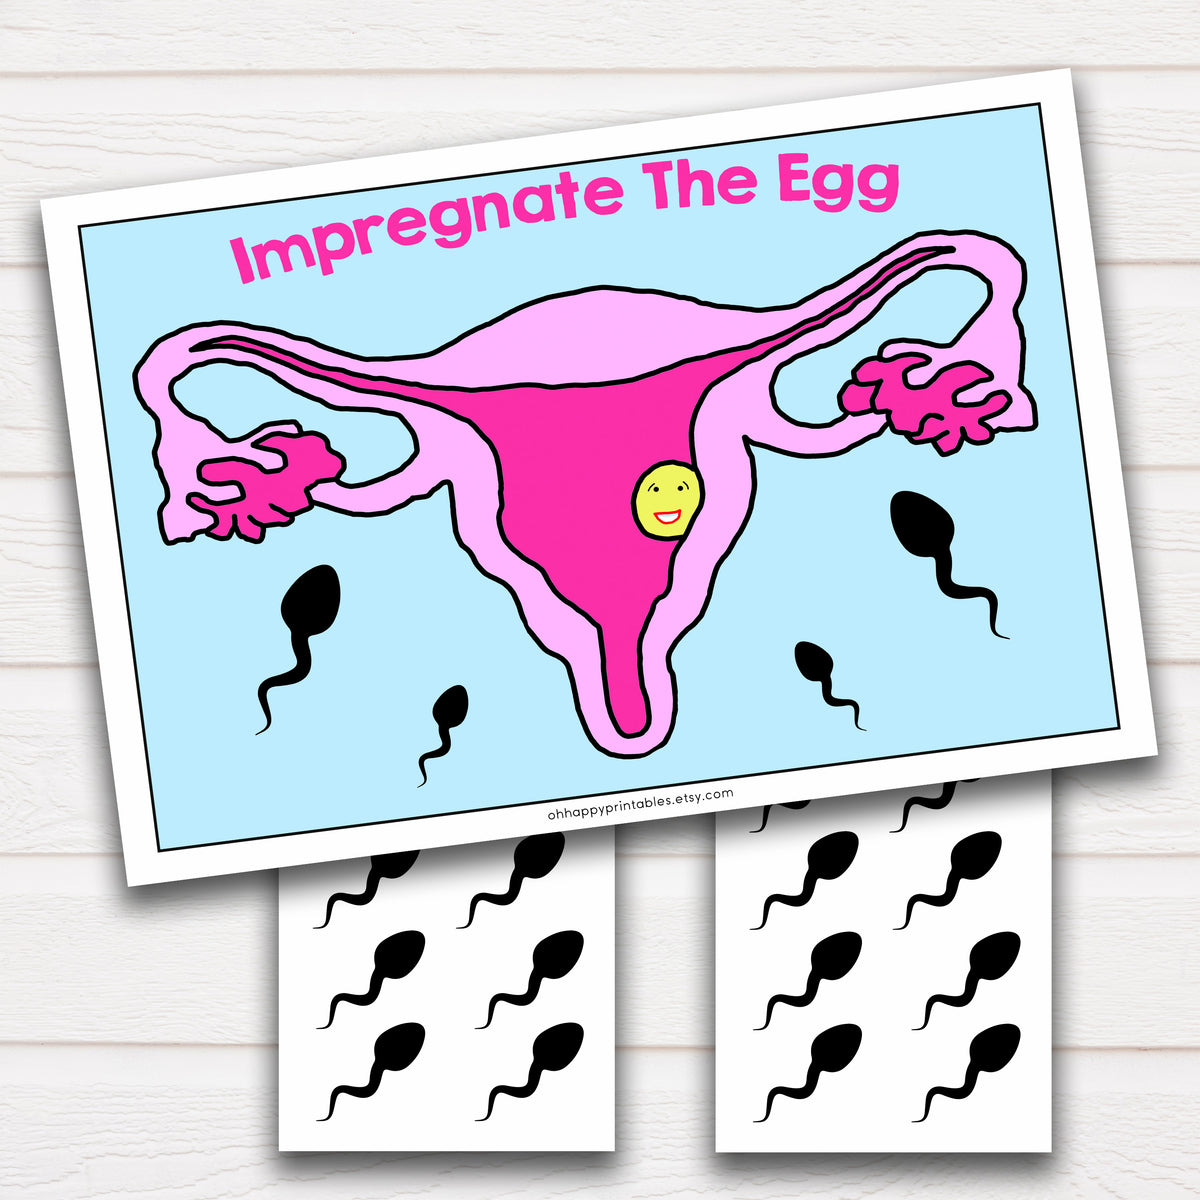 Impregnate The Egg Baby Shower Game, Pin The Sperm, Baby Shower Games, Find The Egg, Pin The Sperm Game, Baby Shower Fun Games, Shower Ideas, fun baby games, popular baby games